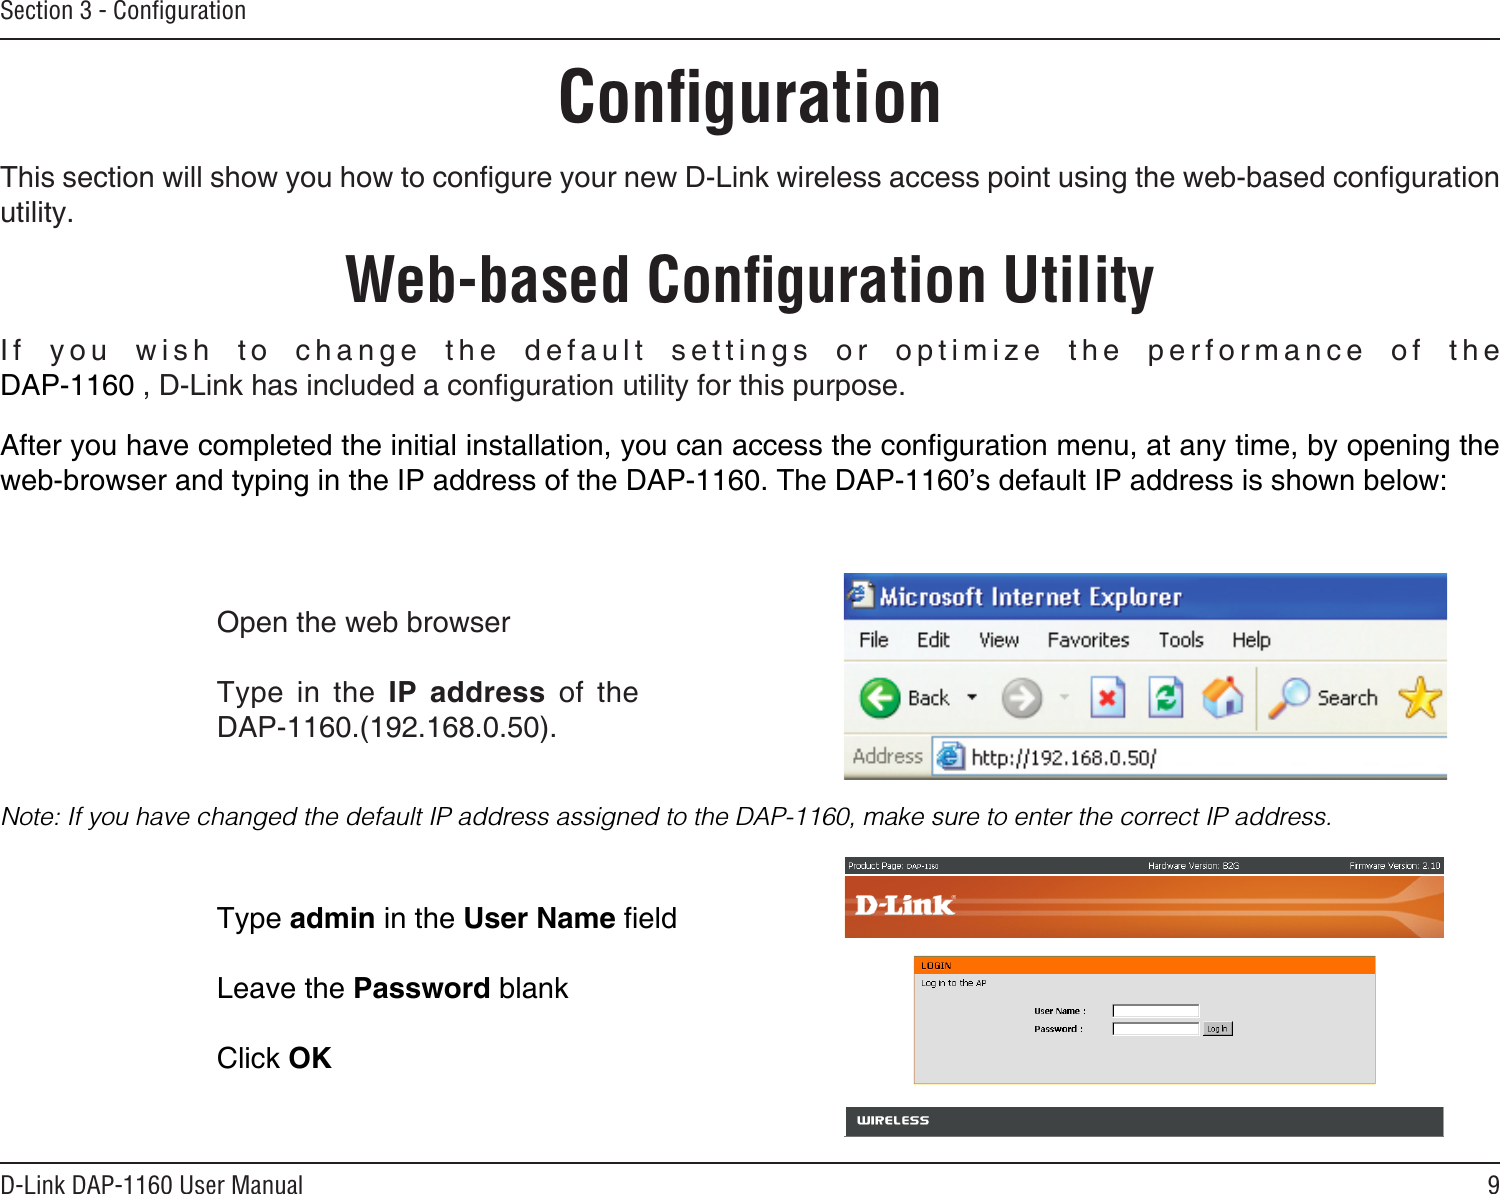 9D-Link DAP-1160 User ManualSection 3 - ConﬁgurationConﬁgurationThis section will show you how to congure your new D-Link wireless access point using the web-based conguration utility.Web-based Conﬁguration UtilityOpen the web browserType  in  the  IP  address  of  the DAP-1160.(192.168.0.50).If  you  wish  to  change  the  default  settings  or  optimize  the  performance  of  the DAP-1160 , D-Link has included a conguration utility for this purpose.After you have completed the initial installation, you can access the conguration menu, at any time, by opening the web-browser and typing in the IP address of the DAP-1160. The DAP-1160’s default IP address is shown below:Note: If you have changed the default IP address assigned to the DAP-1160, make sure to enter the correct IP address. Type admin in the User Name eld Leave the Password blankClick OK